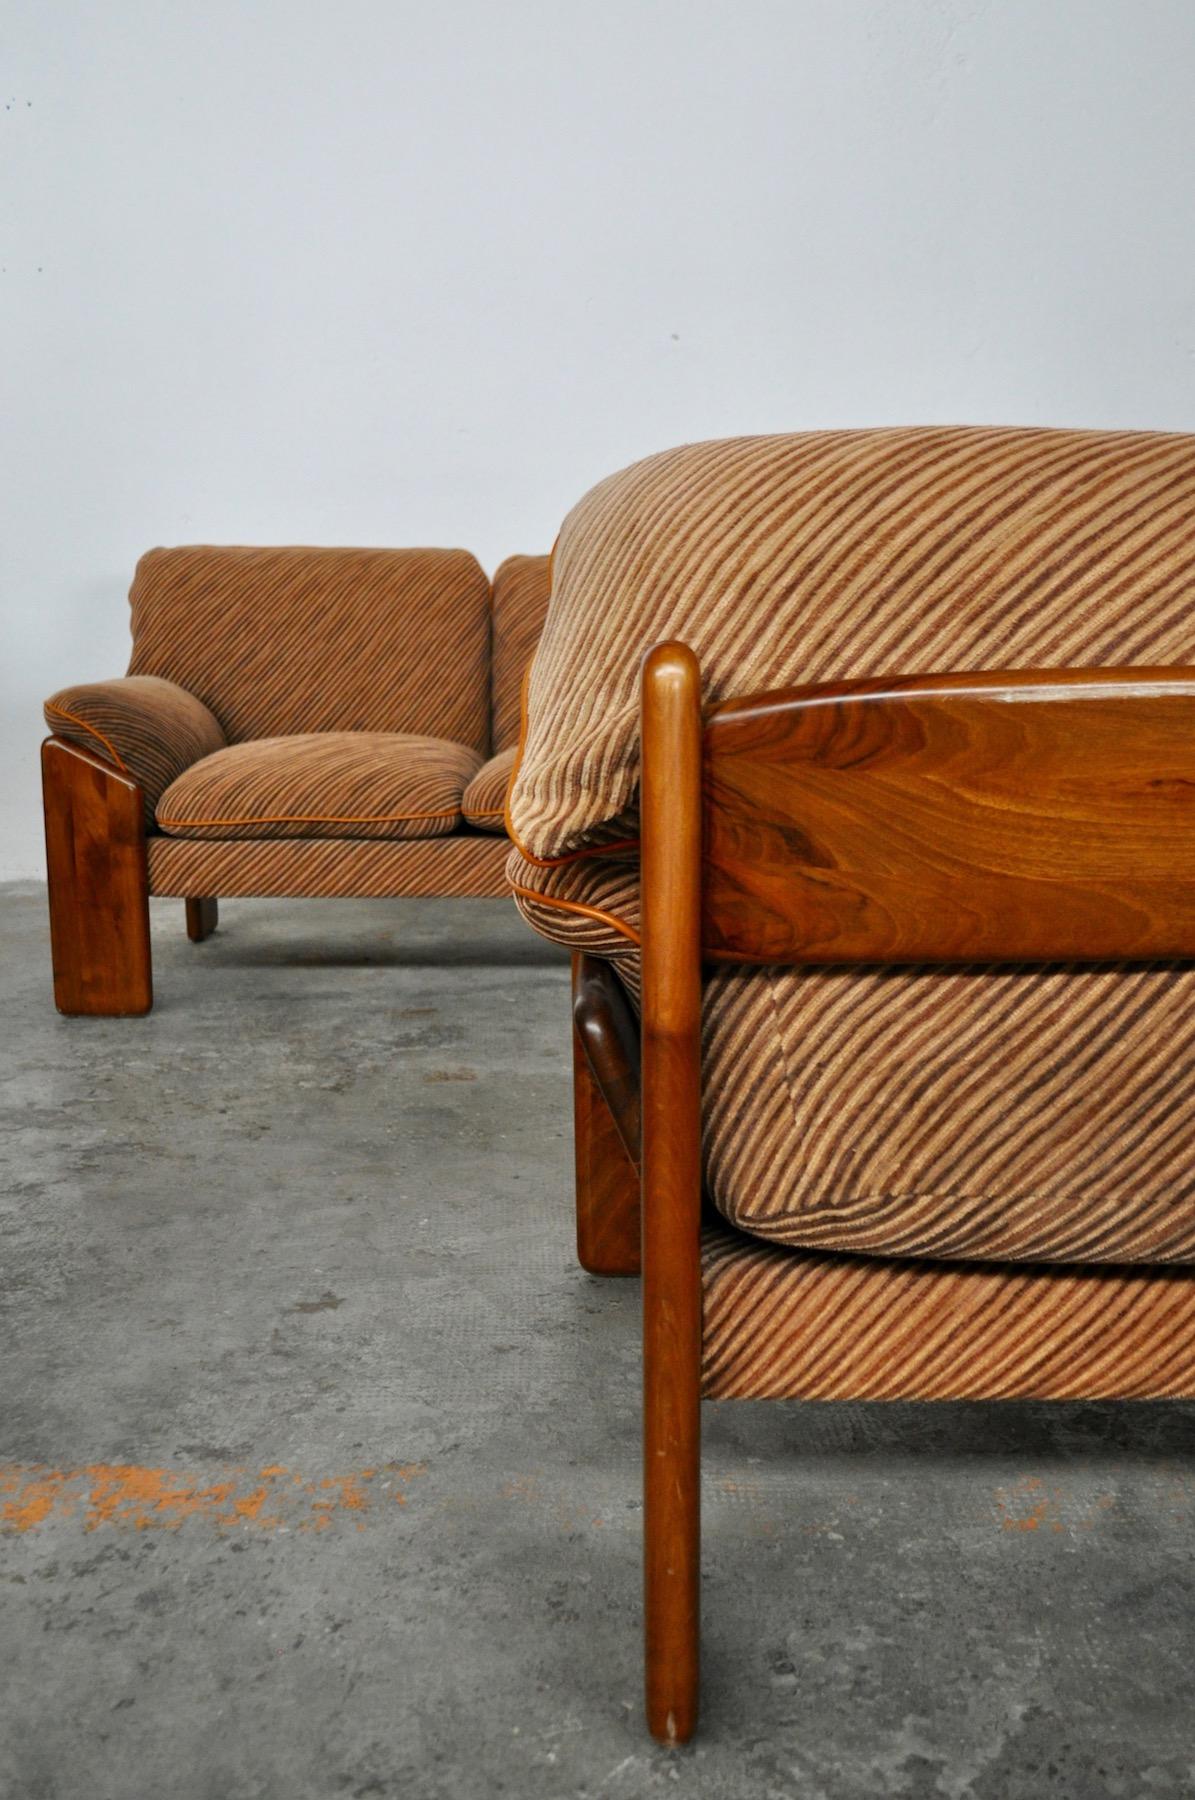 Sofa and Armchairs in Walnut Wood by Mobil Girgi, 1970s For Sale 3